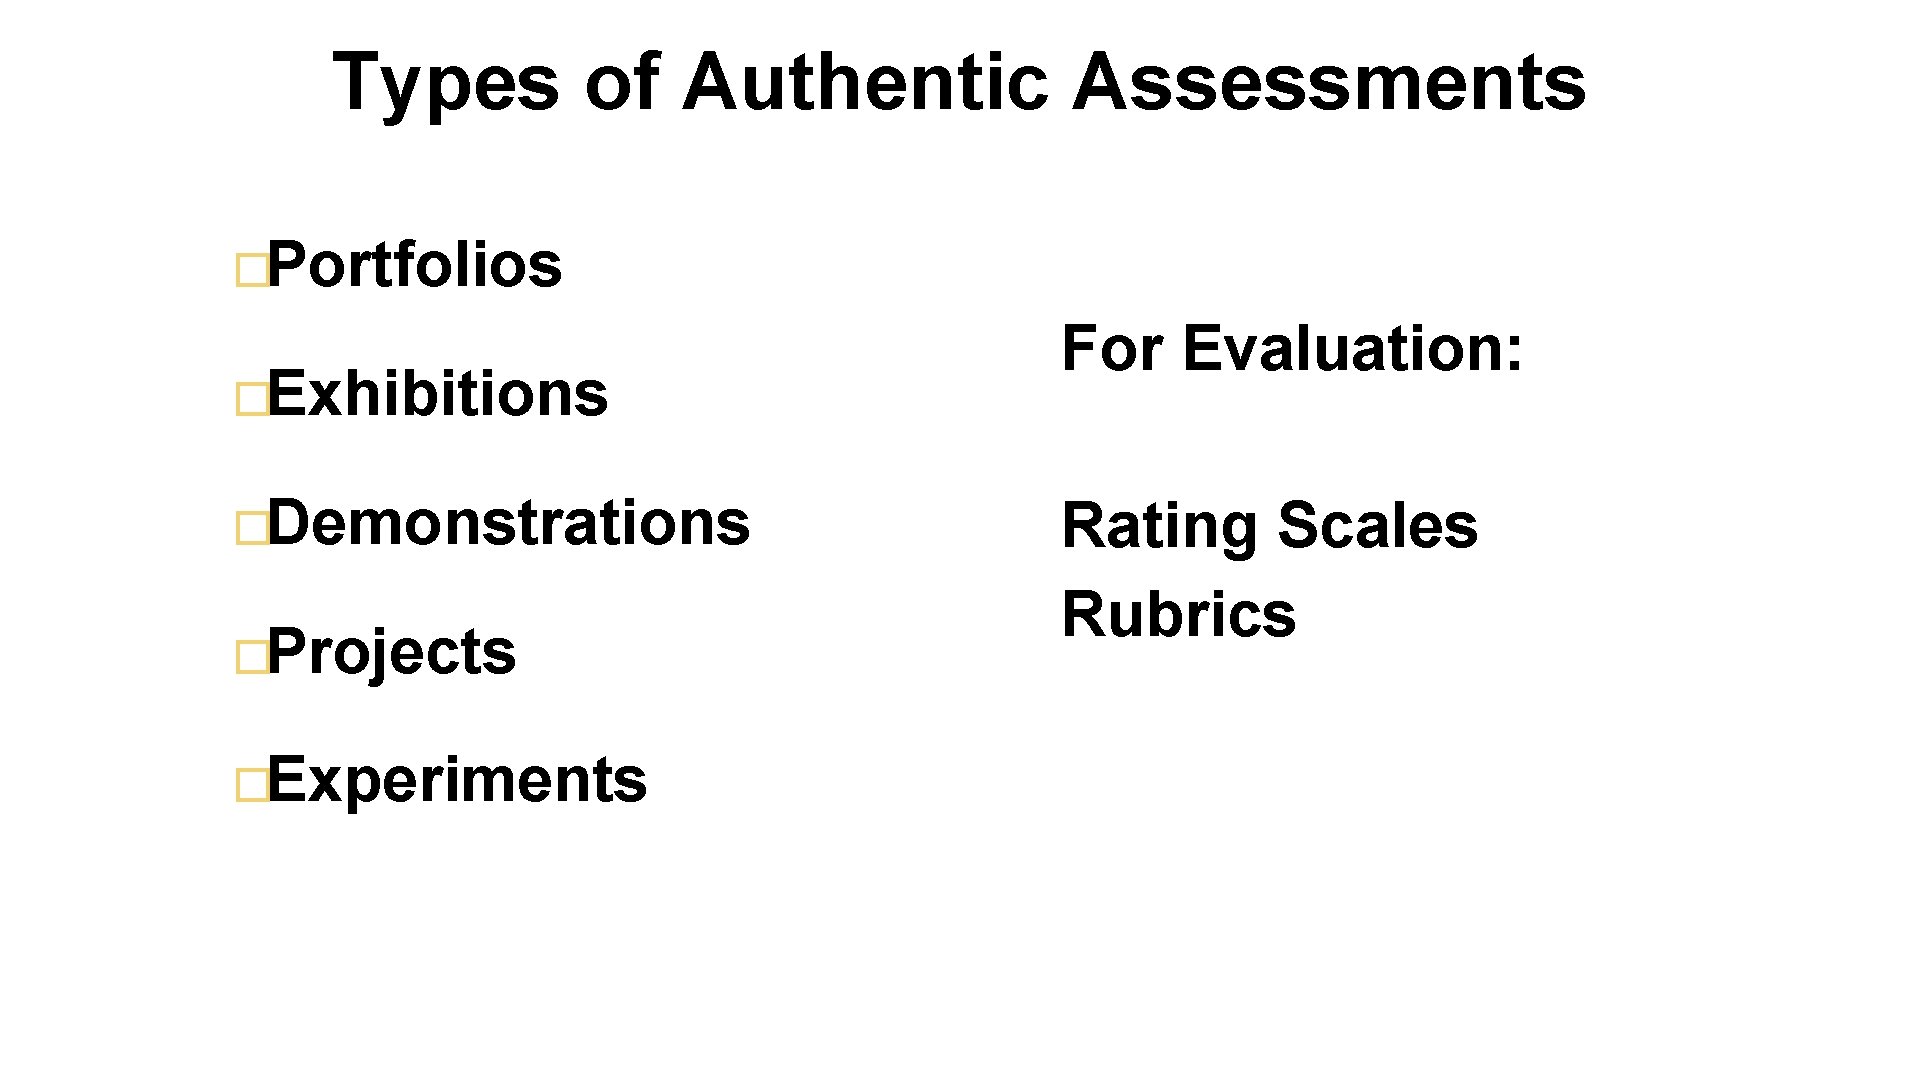 Types of Authentic Assessments �Portfolios �Exhibitions �Demonstrations �Projects �Experiments For Evaluation: Rating Scales Rubrics